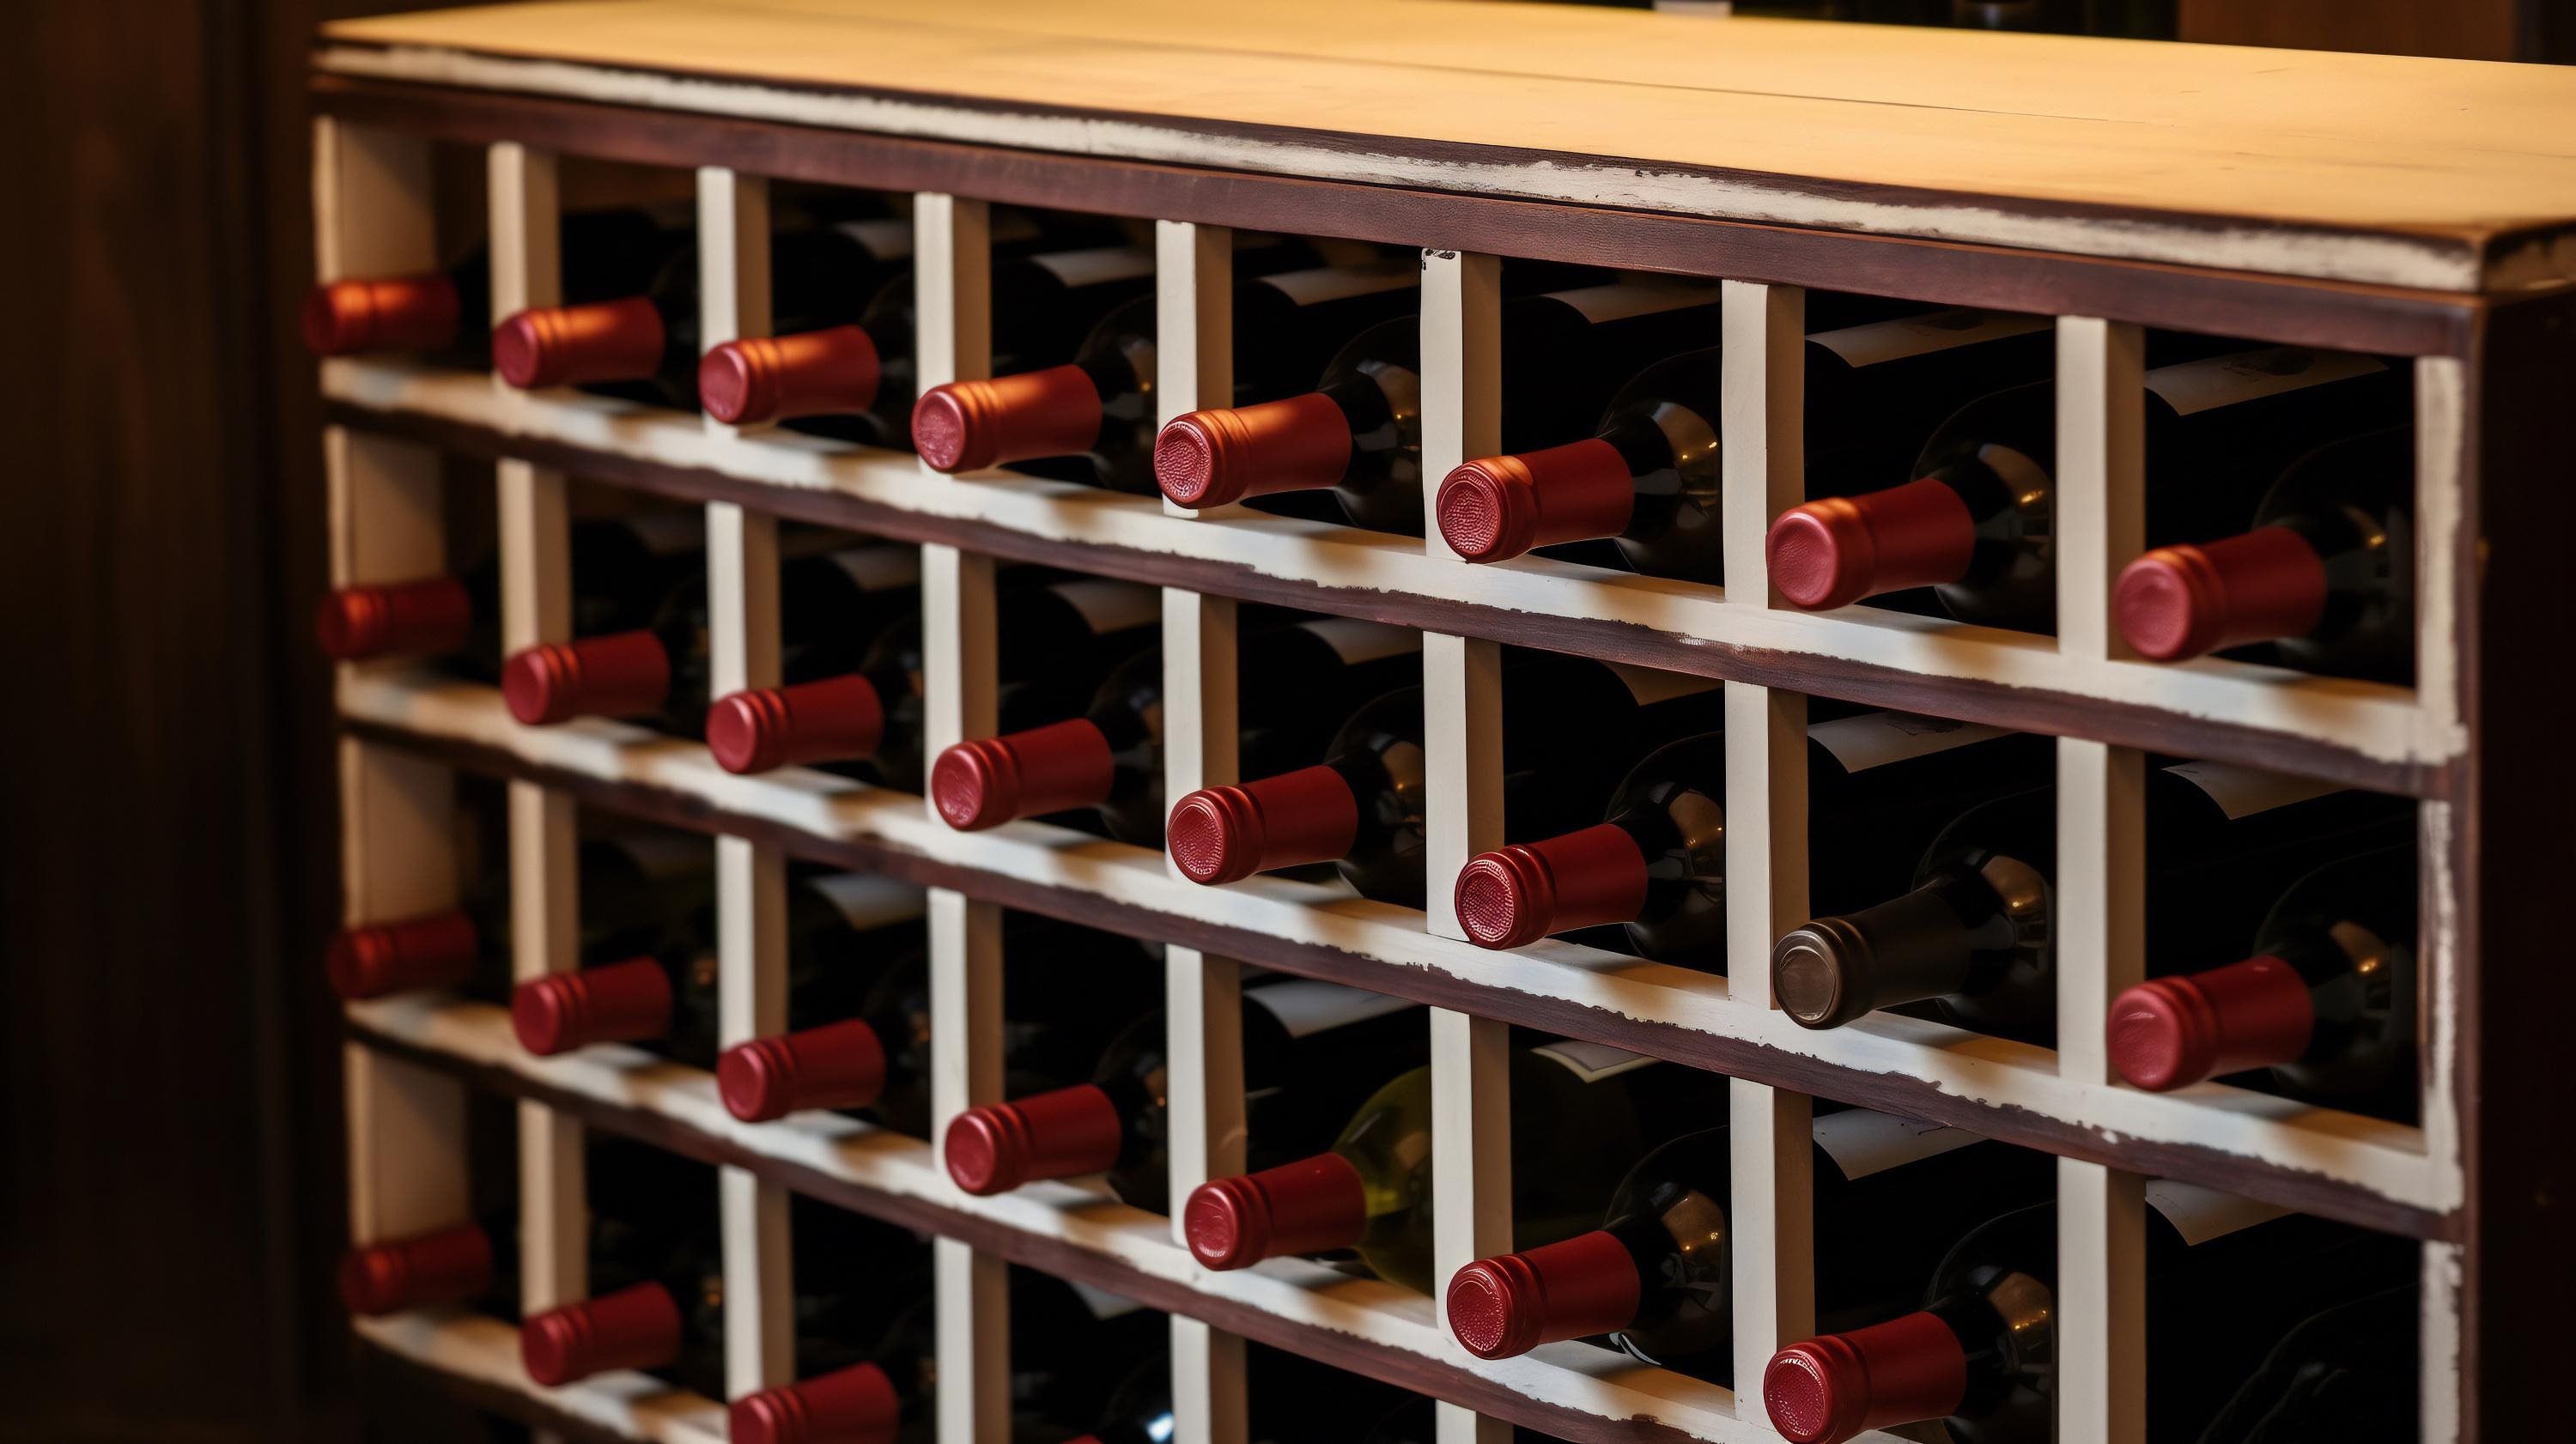 A merchant ordered to pay 350,000 euros to a winegrower after buying wine from him at an “abusively low” price